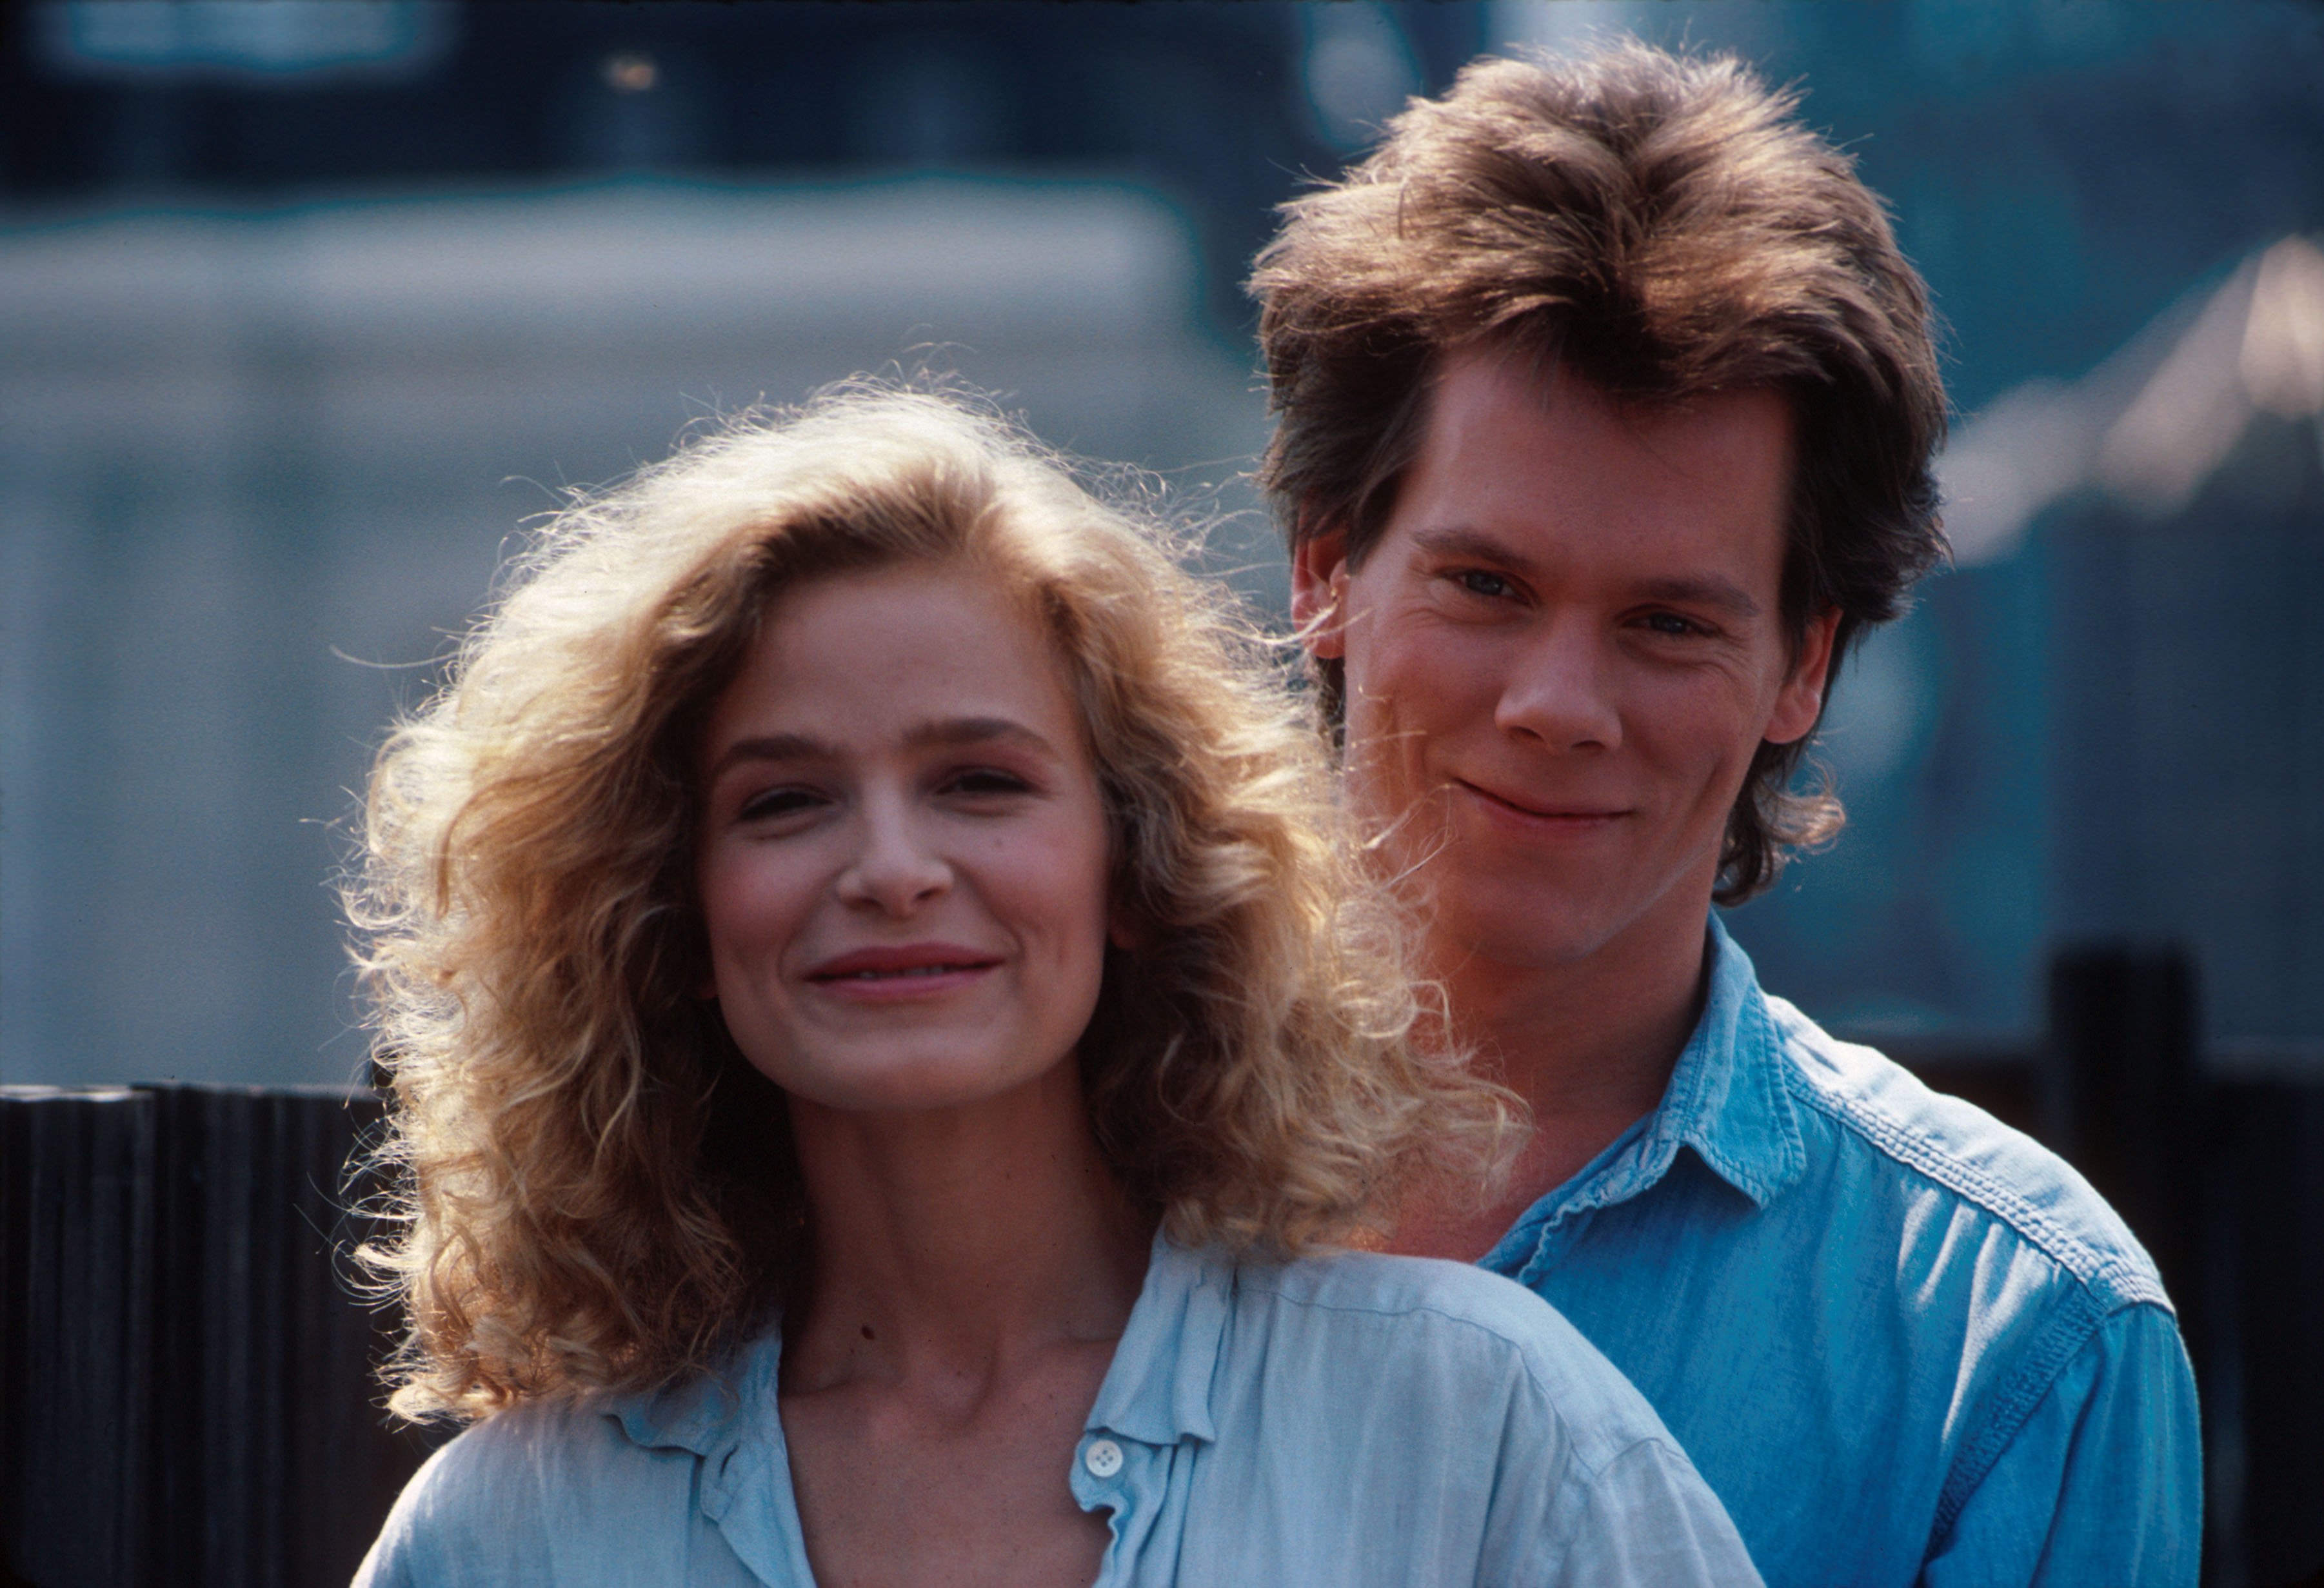 Kevin Bacon with Kyra Sedgwick on photo shoot in New York in August 1988 | Source: Getty Images